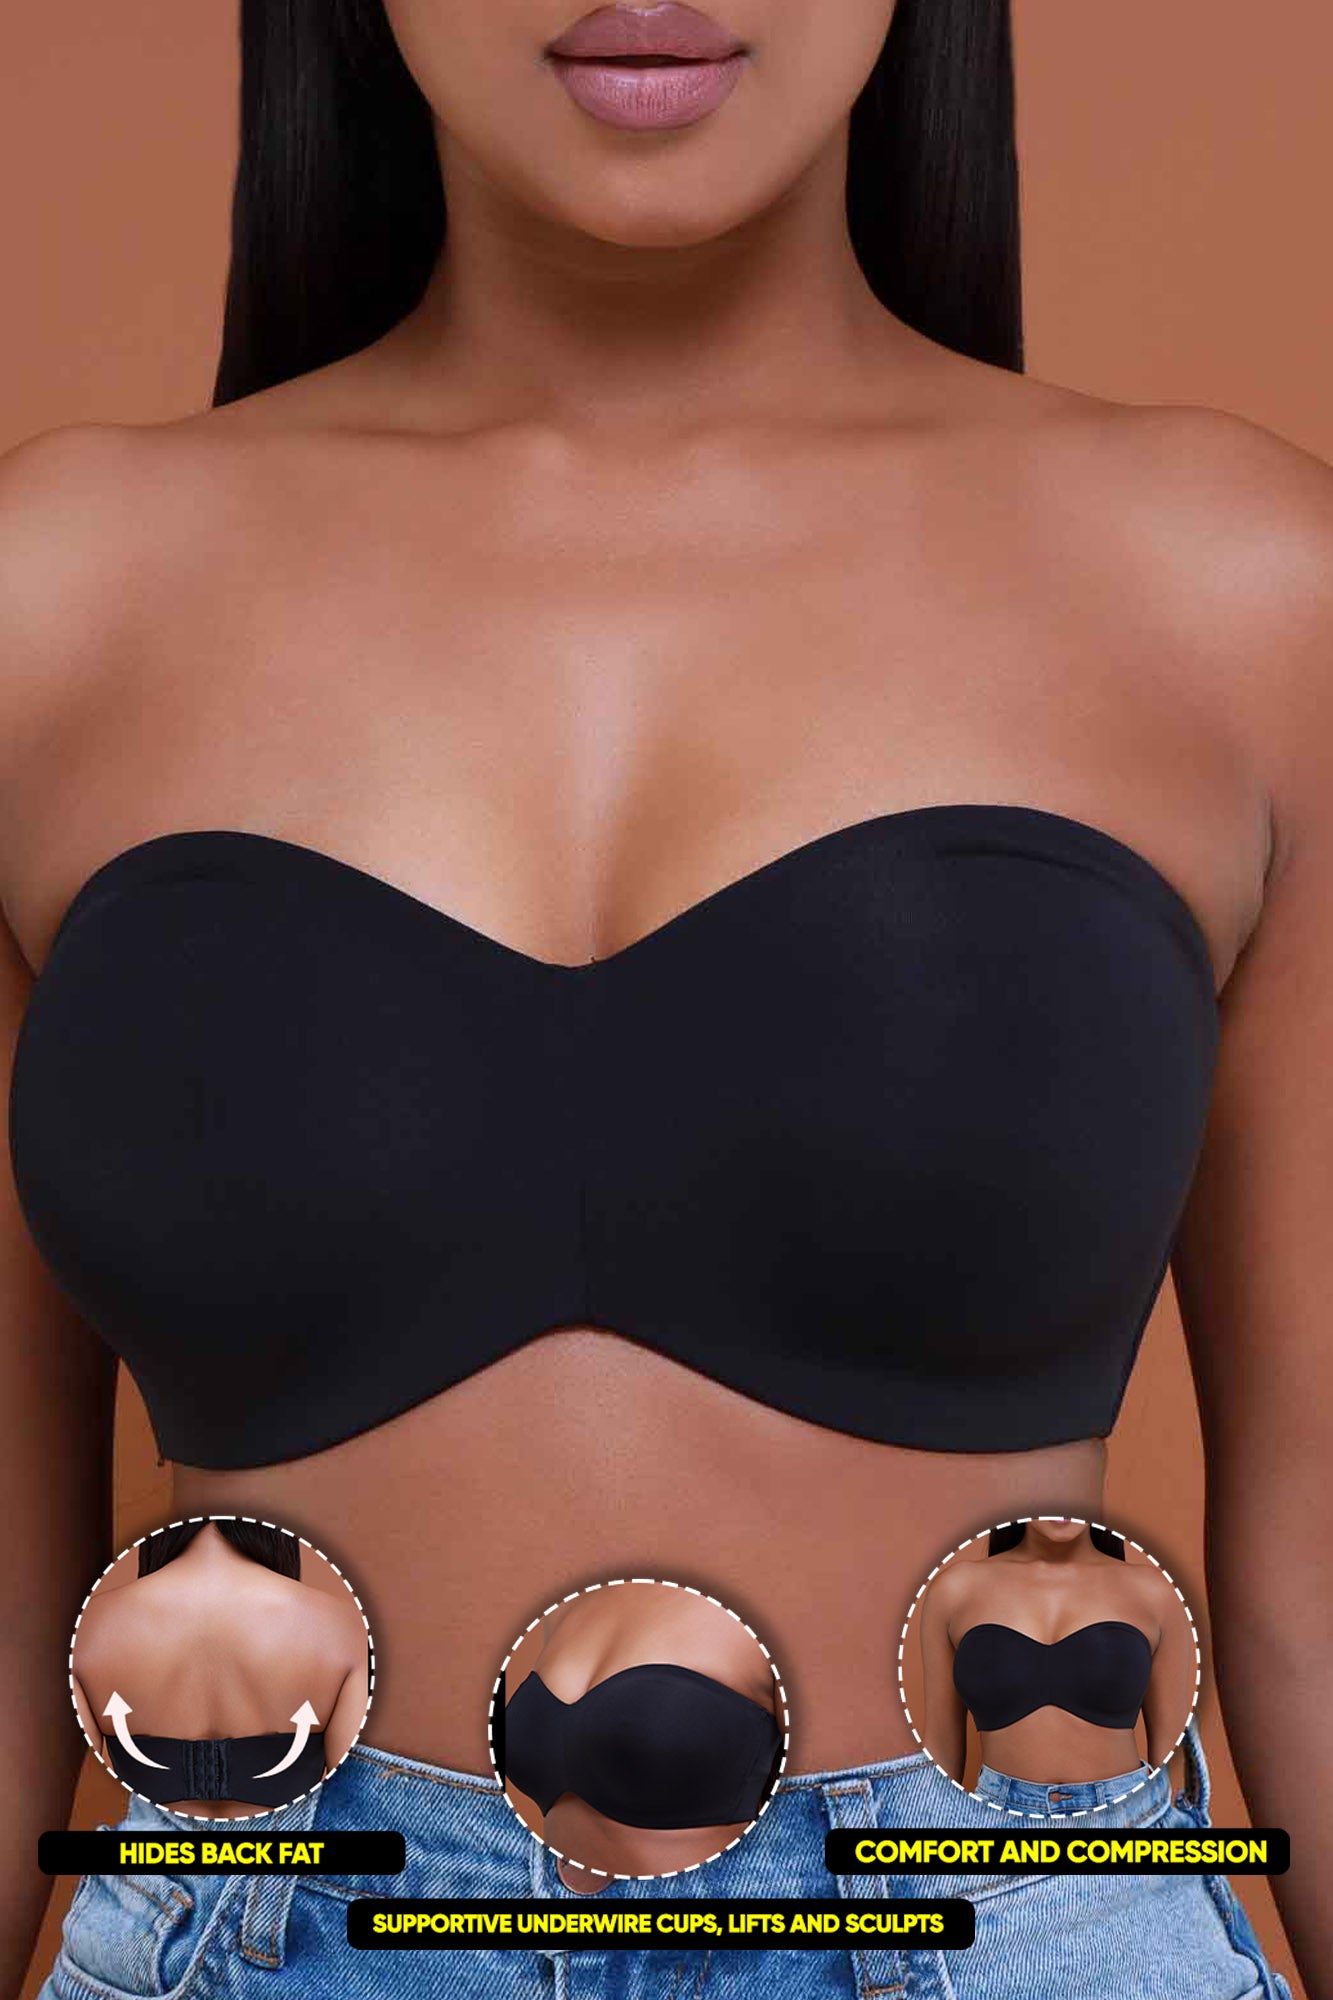 I'm a bra snob with 38DDD boobs - I've found the best strapless bra that  lifts and secures me - it's a total bargain too